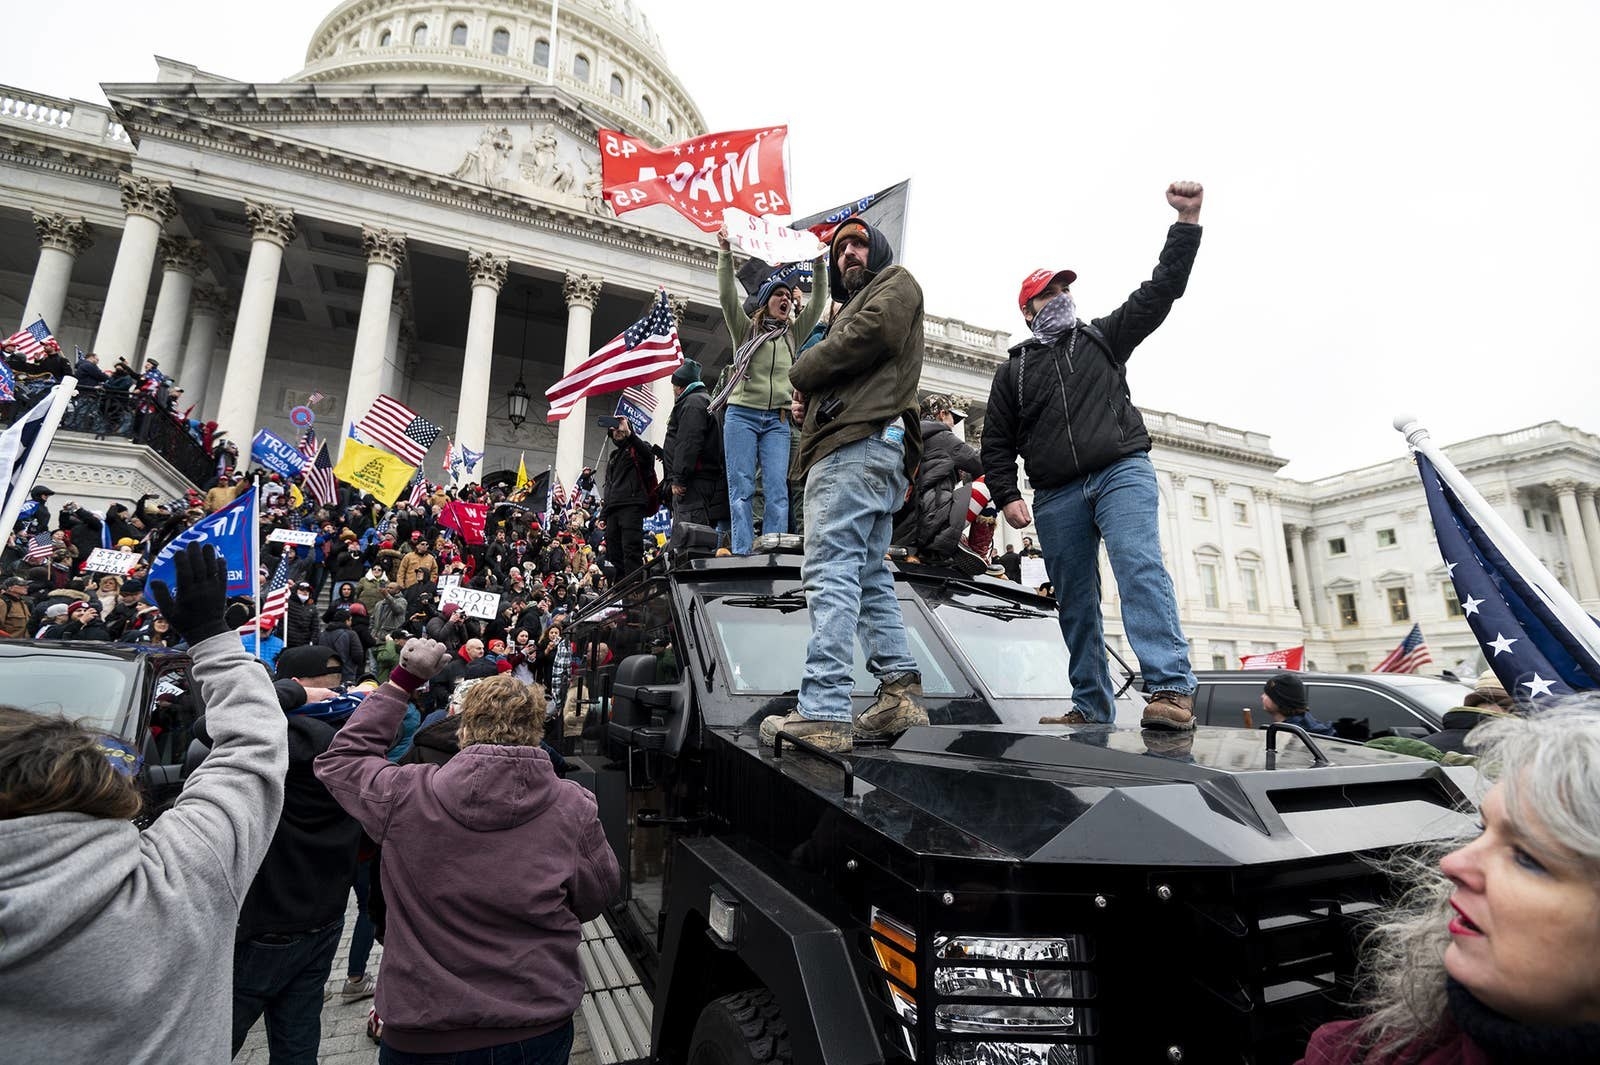 Trump-supporting rioters storming the Capitol building in, with two men standing on the hood of an armored car and others waving flags